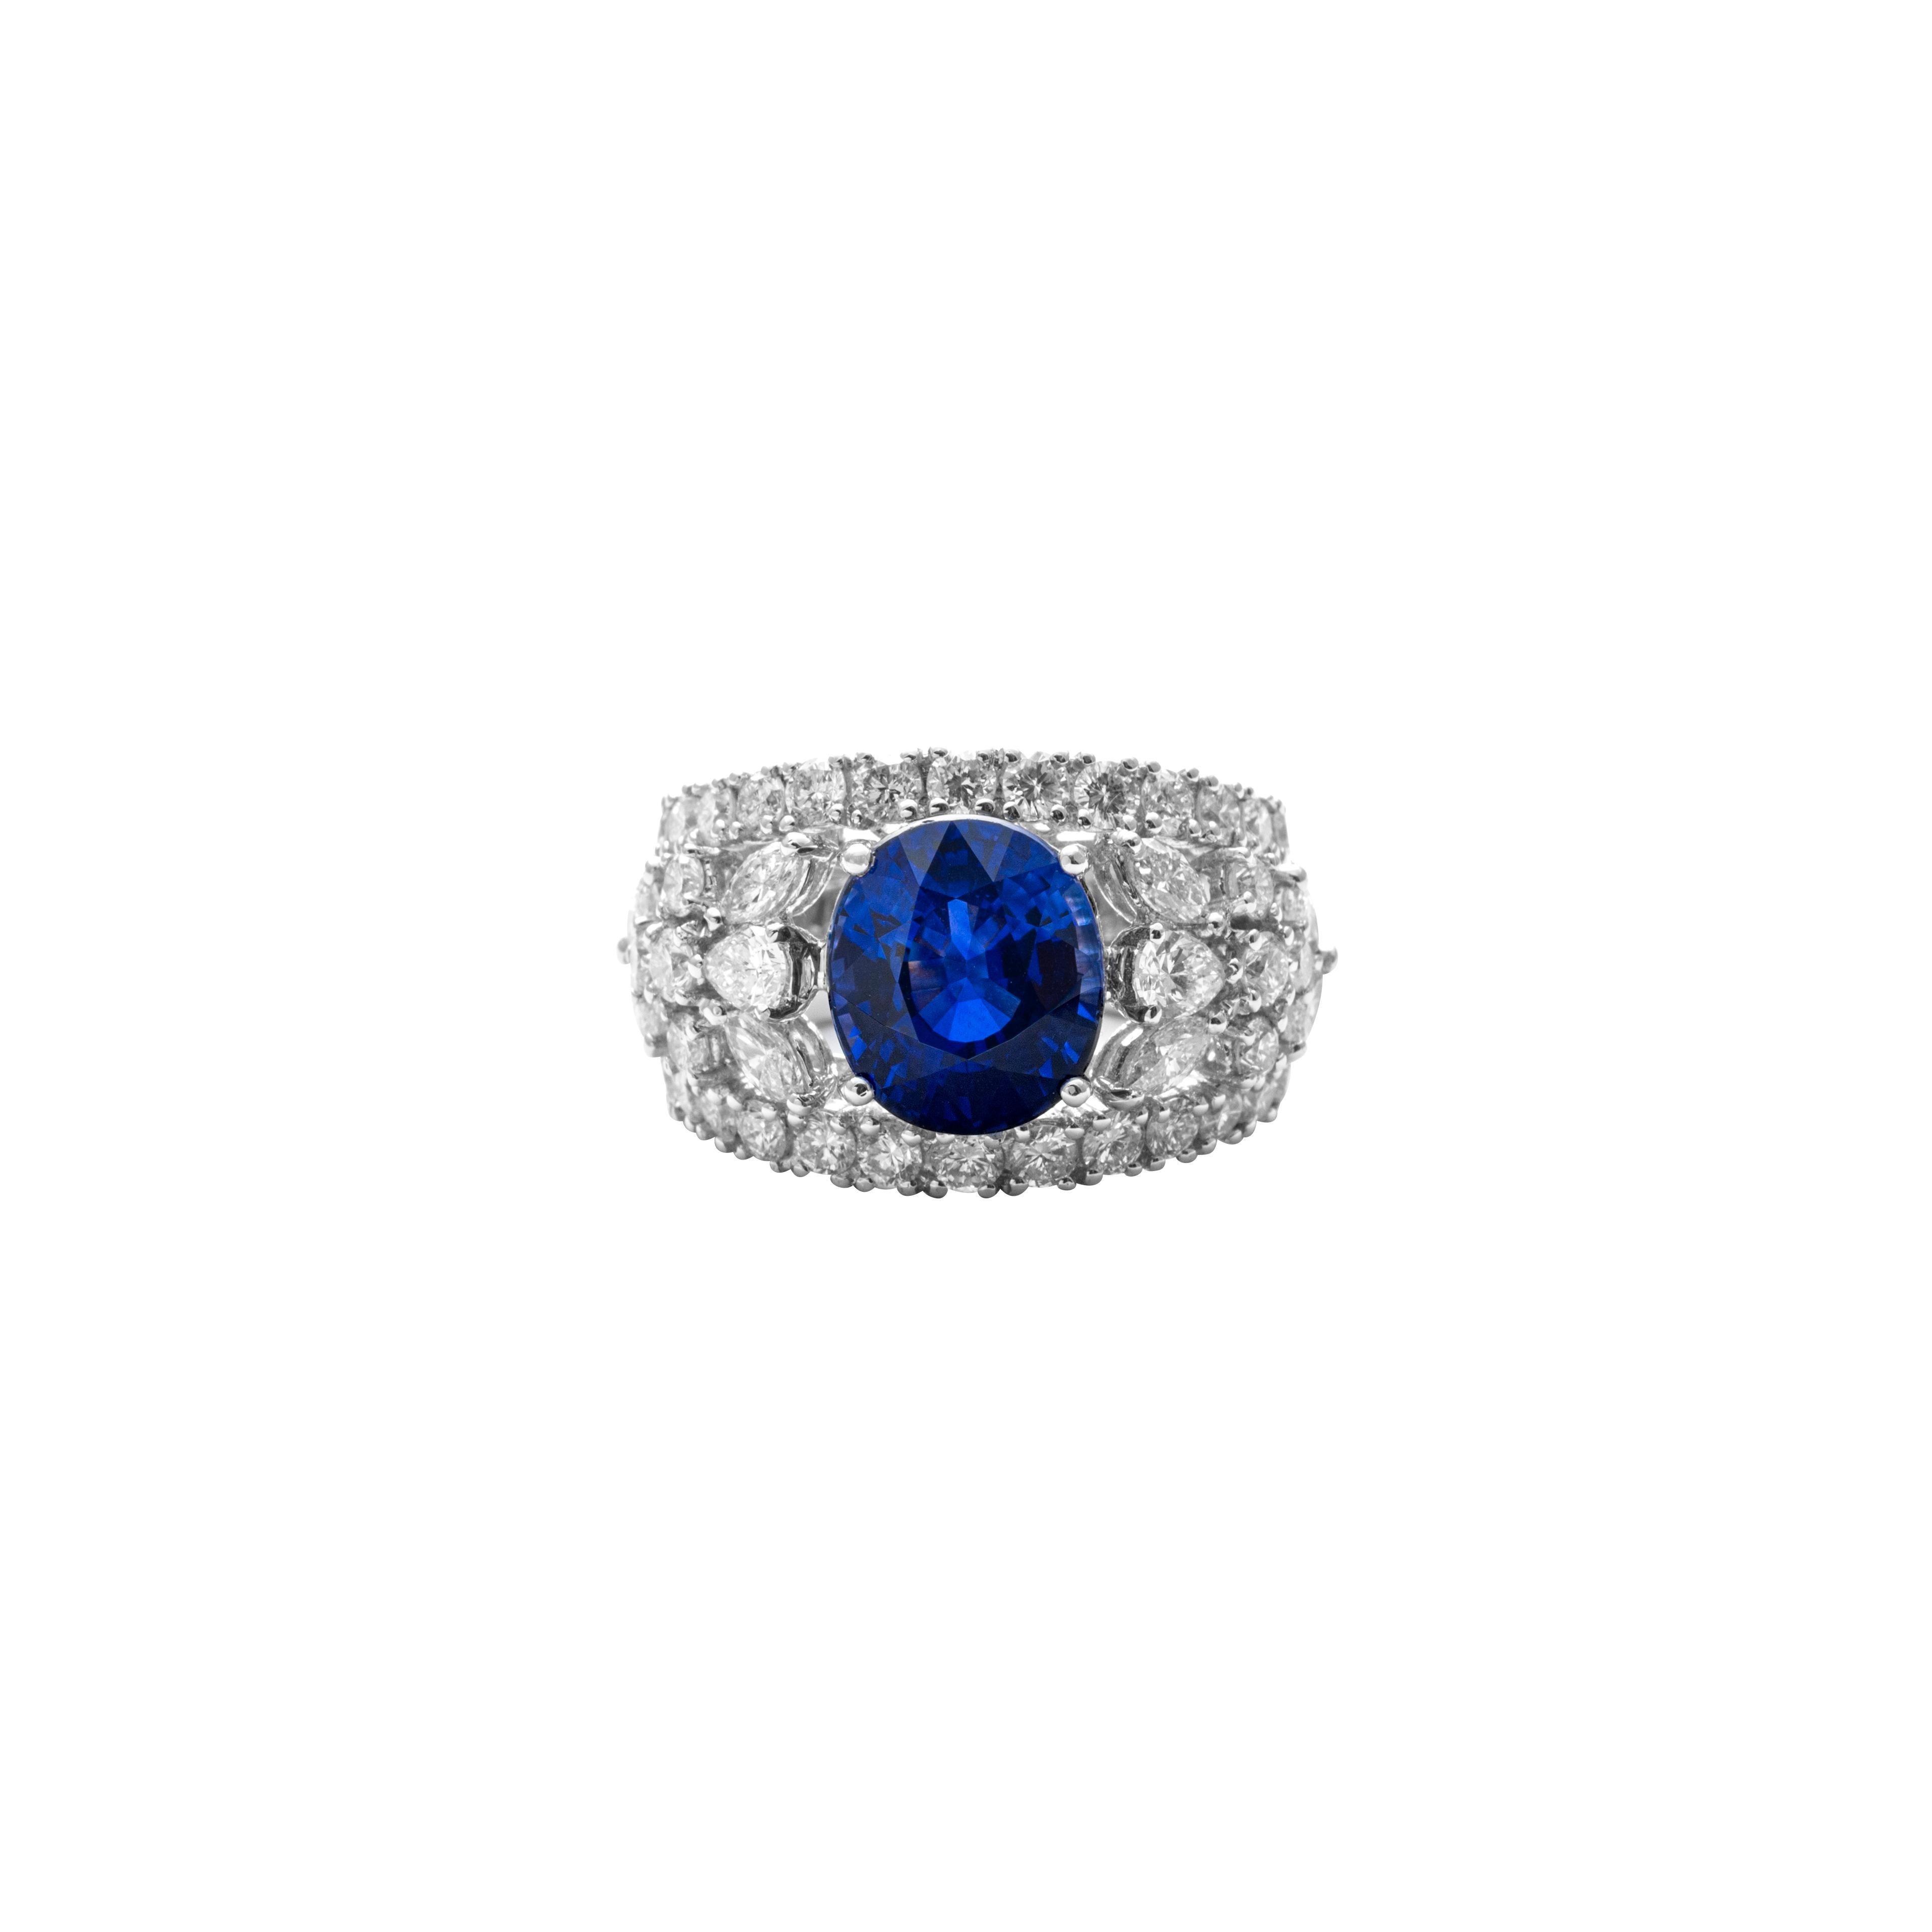 7.35ct Blue Sapphire And Diamond Ring in 18 Karat White Gold

Stunning blue sapphire and white diamonds come together to create a beautifully crafted ring set in 18 Karat white gold. This is ideal for evening wear. 

Ring Size - US 6.50
Blue